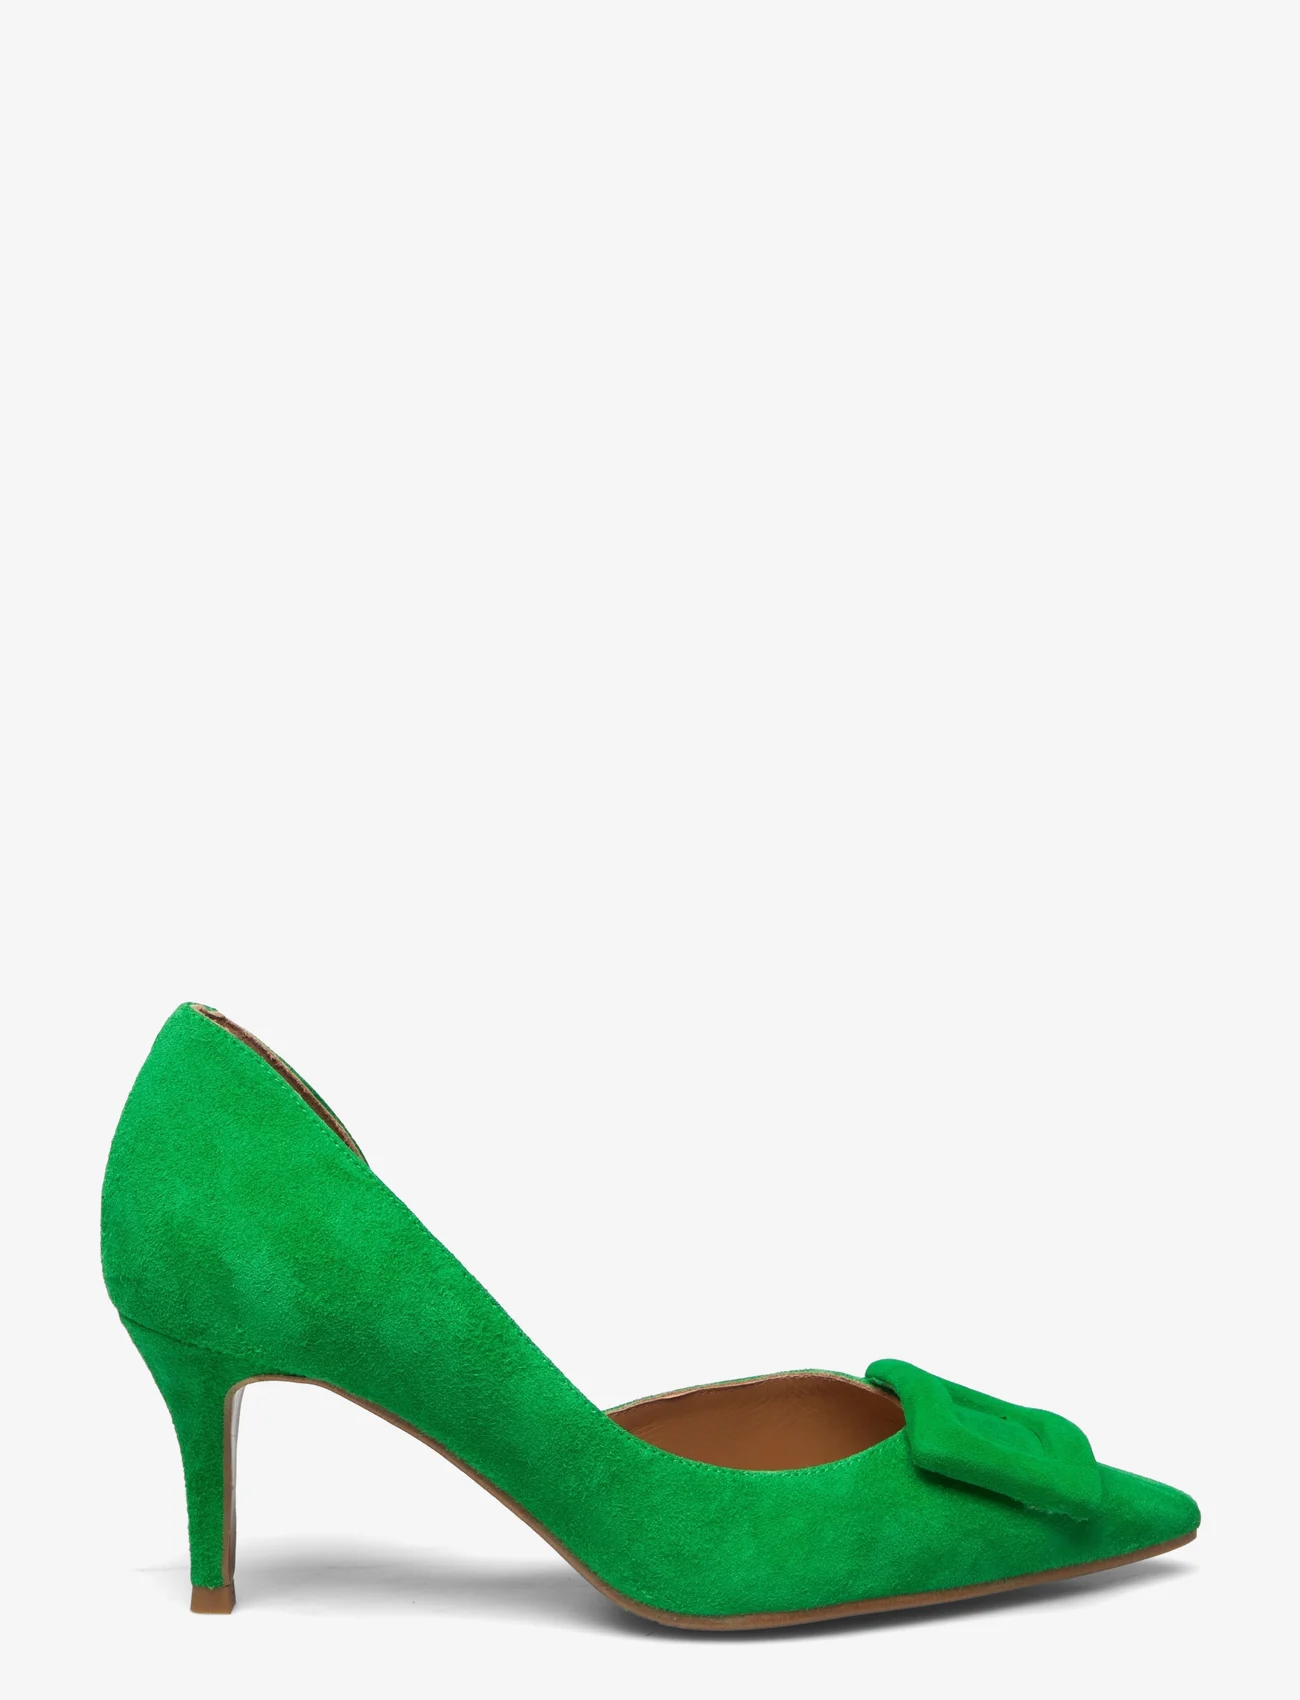 Billi Bi - A4603 - party wear at outlet prices - grass green suede - 1